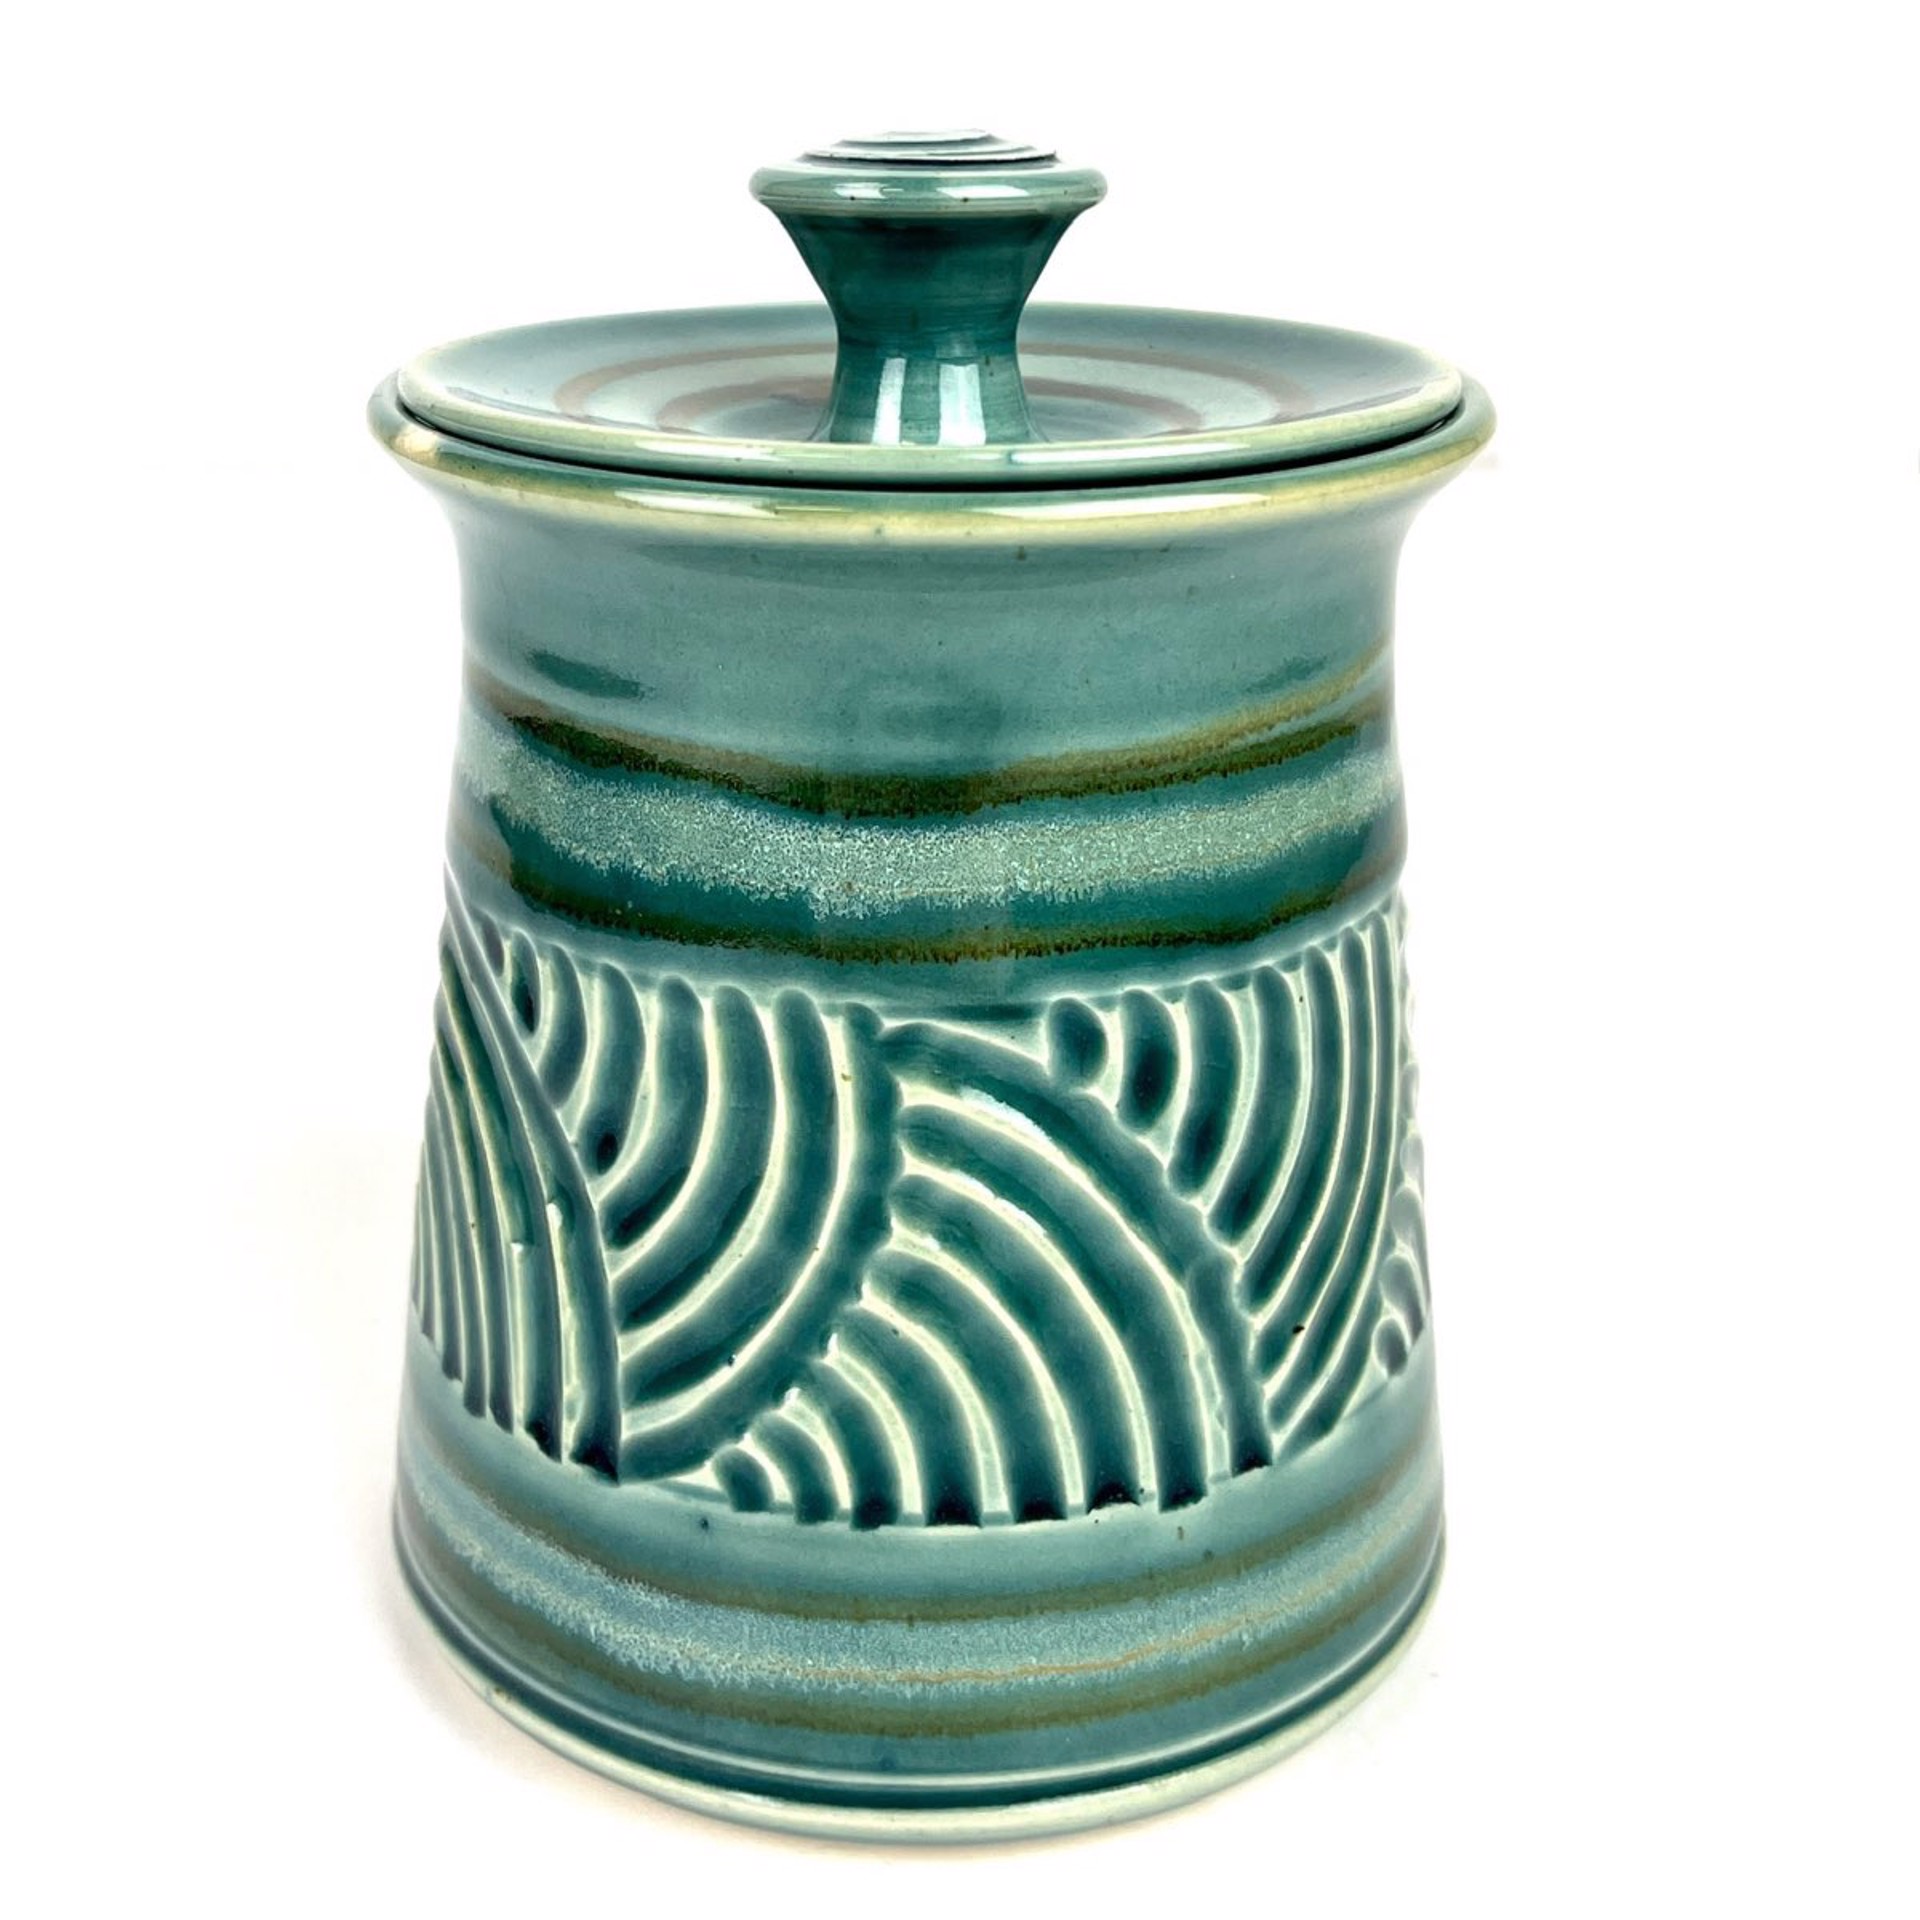 Carved Lidded Container by Mary Lynn Portera